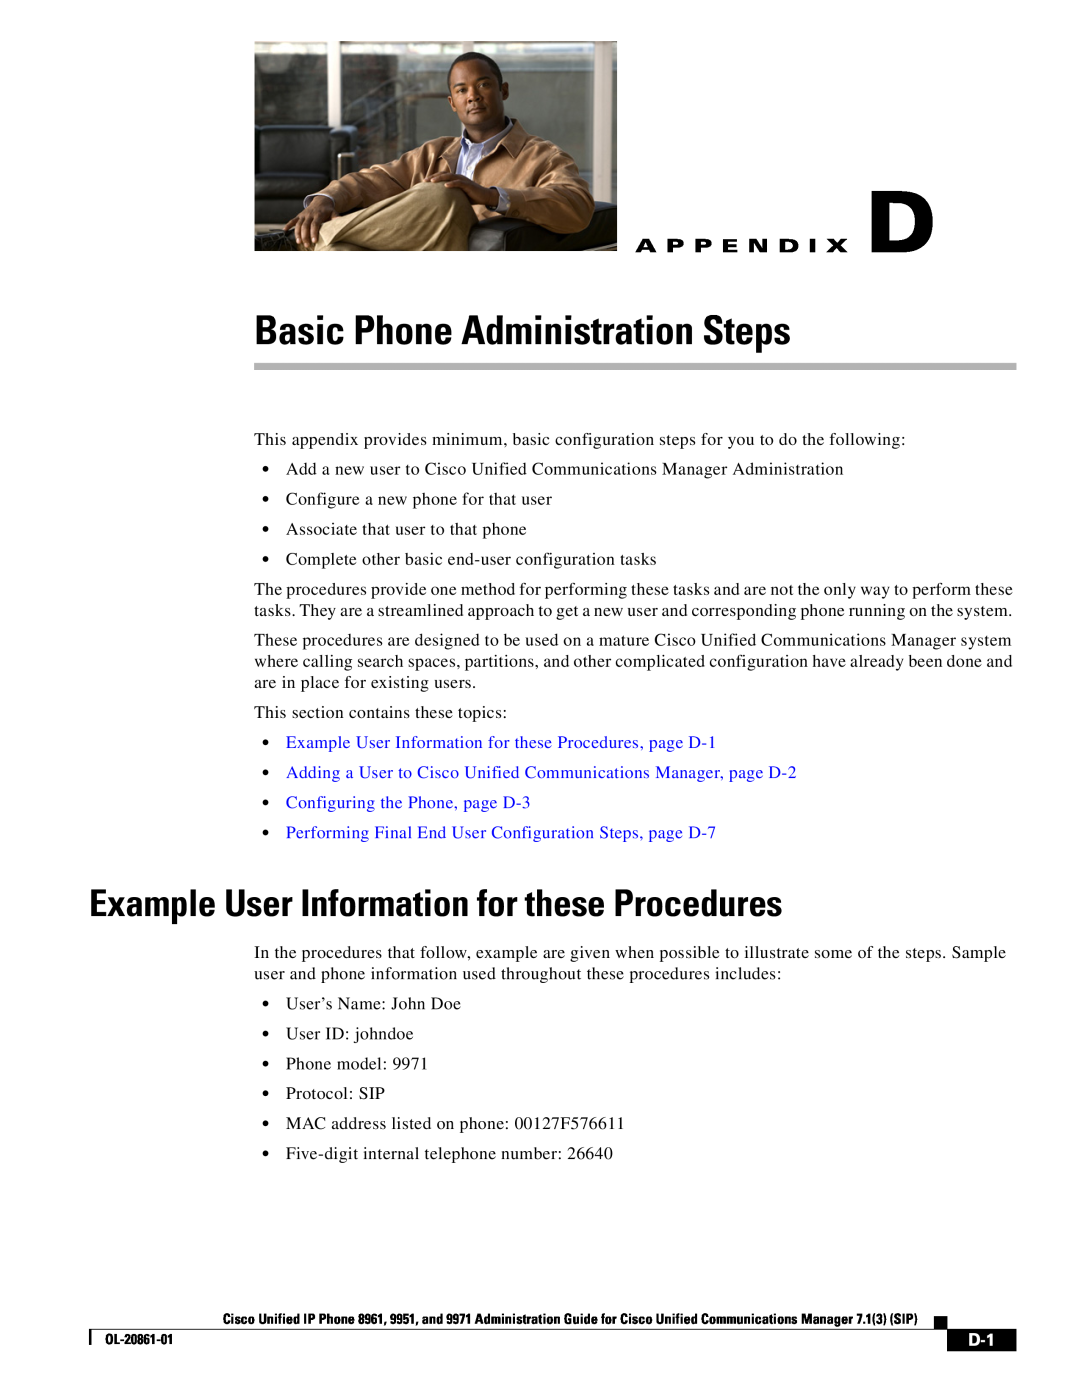 Cisco Systems 9971 appendix Example User Information for these Procedures, Configuring the Phone, page D-3 